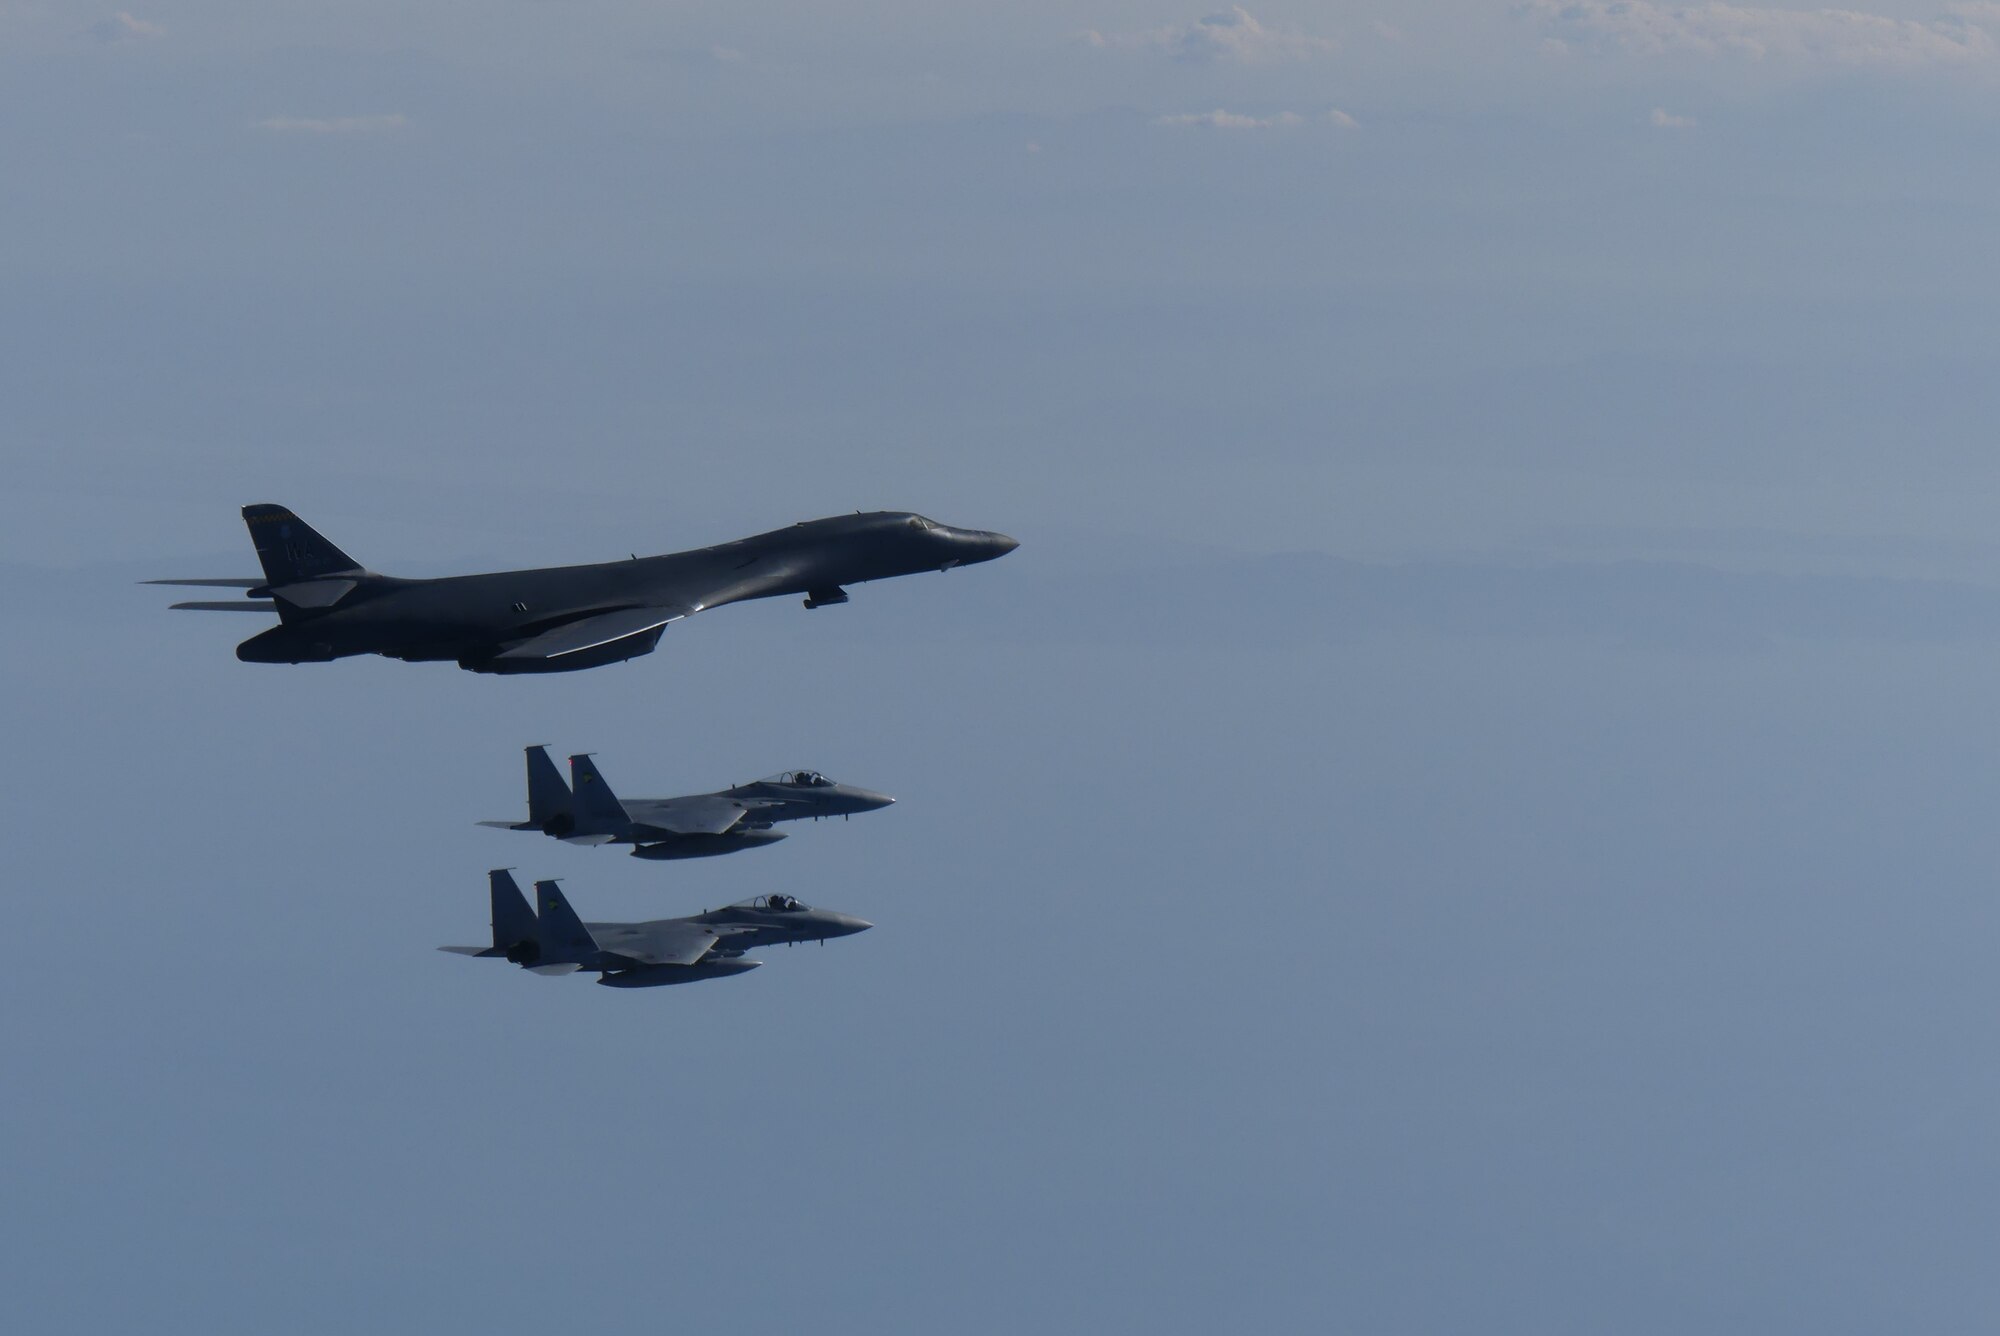 A B-1B Lancer, assigned to the 9th Expeditionary Bomb Squadron, Dyess Air Force Base, Texas, conducts training with two Koku-Jieitai (Japan Air Self Defense Force) F-15 fighters in the vicinity of the Sea of Japan, October 20, 2020.